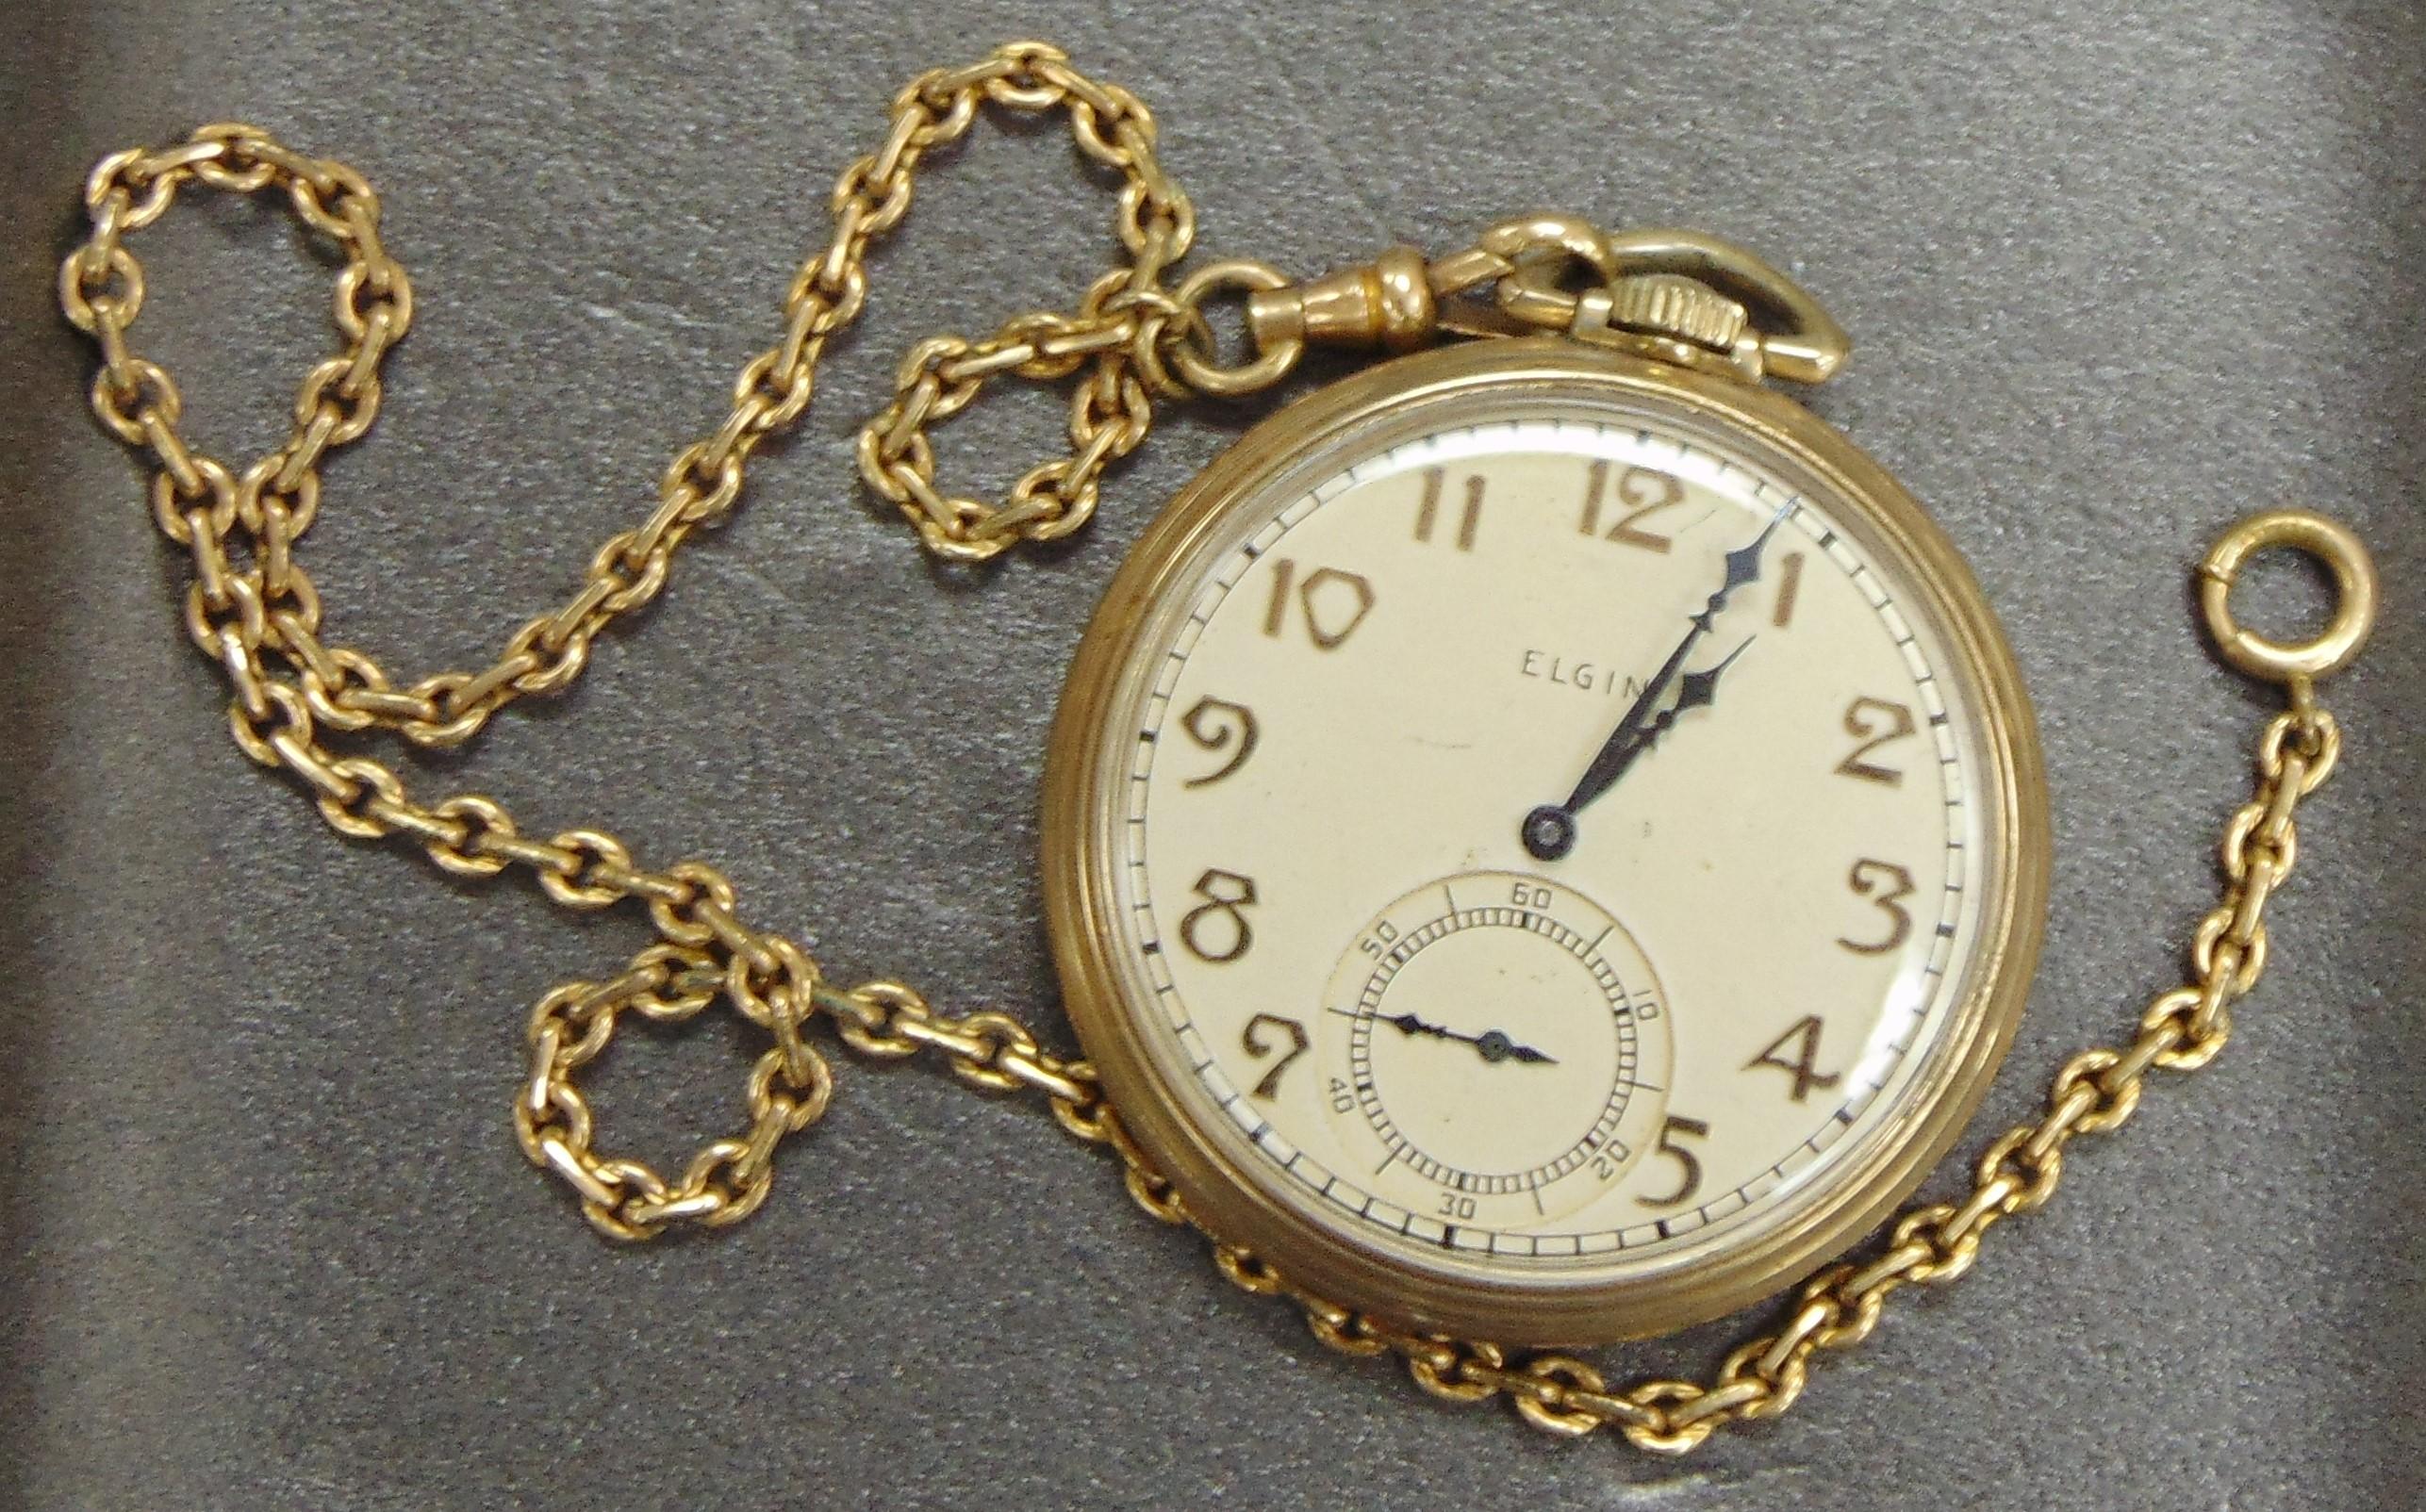 Elgin Pocket Watch with Chain.